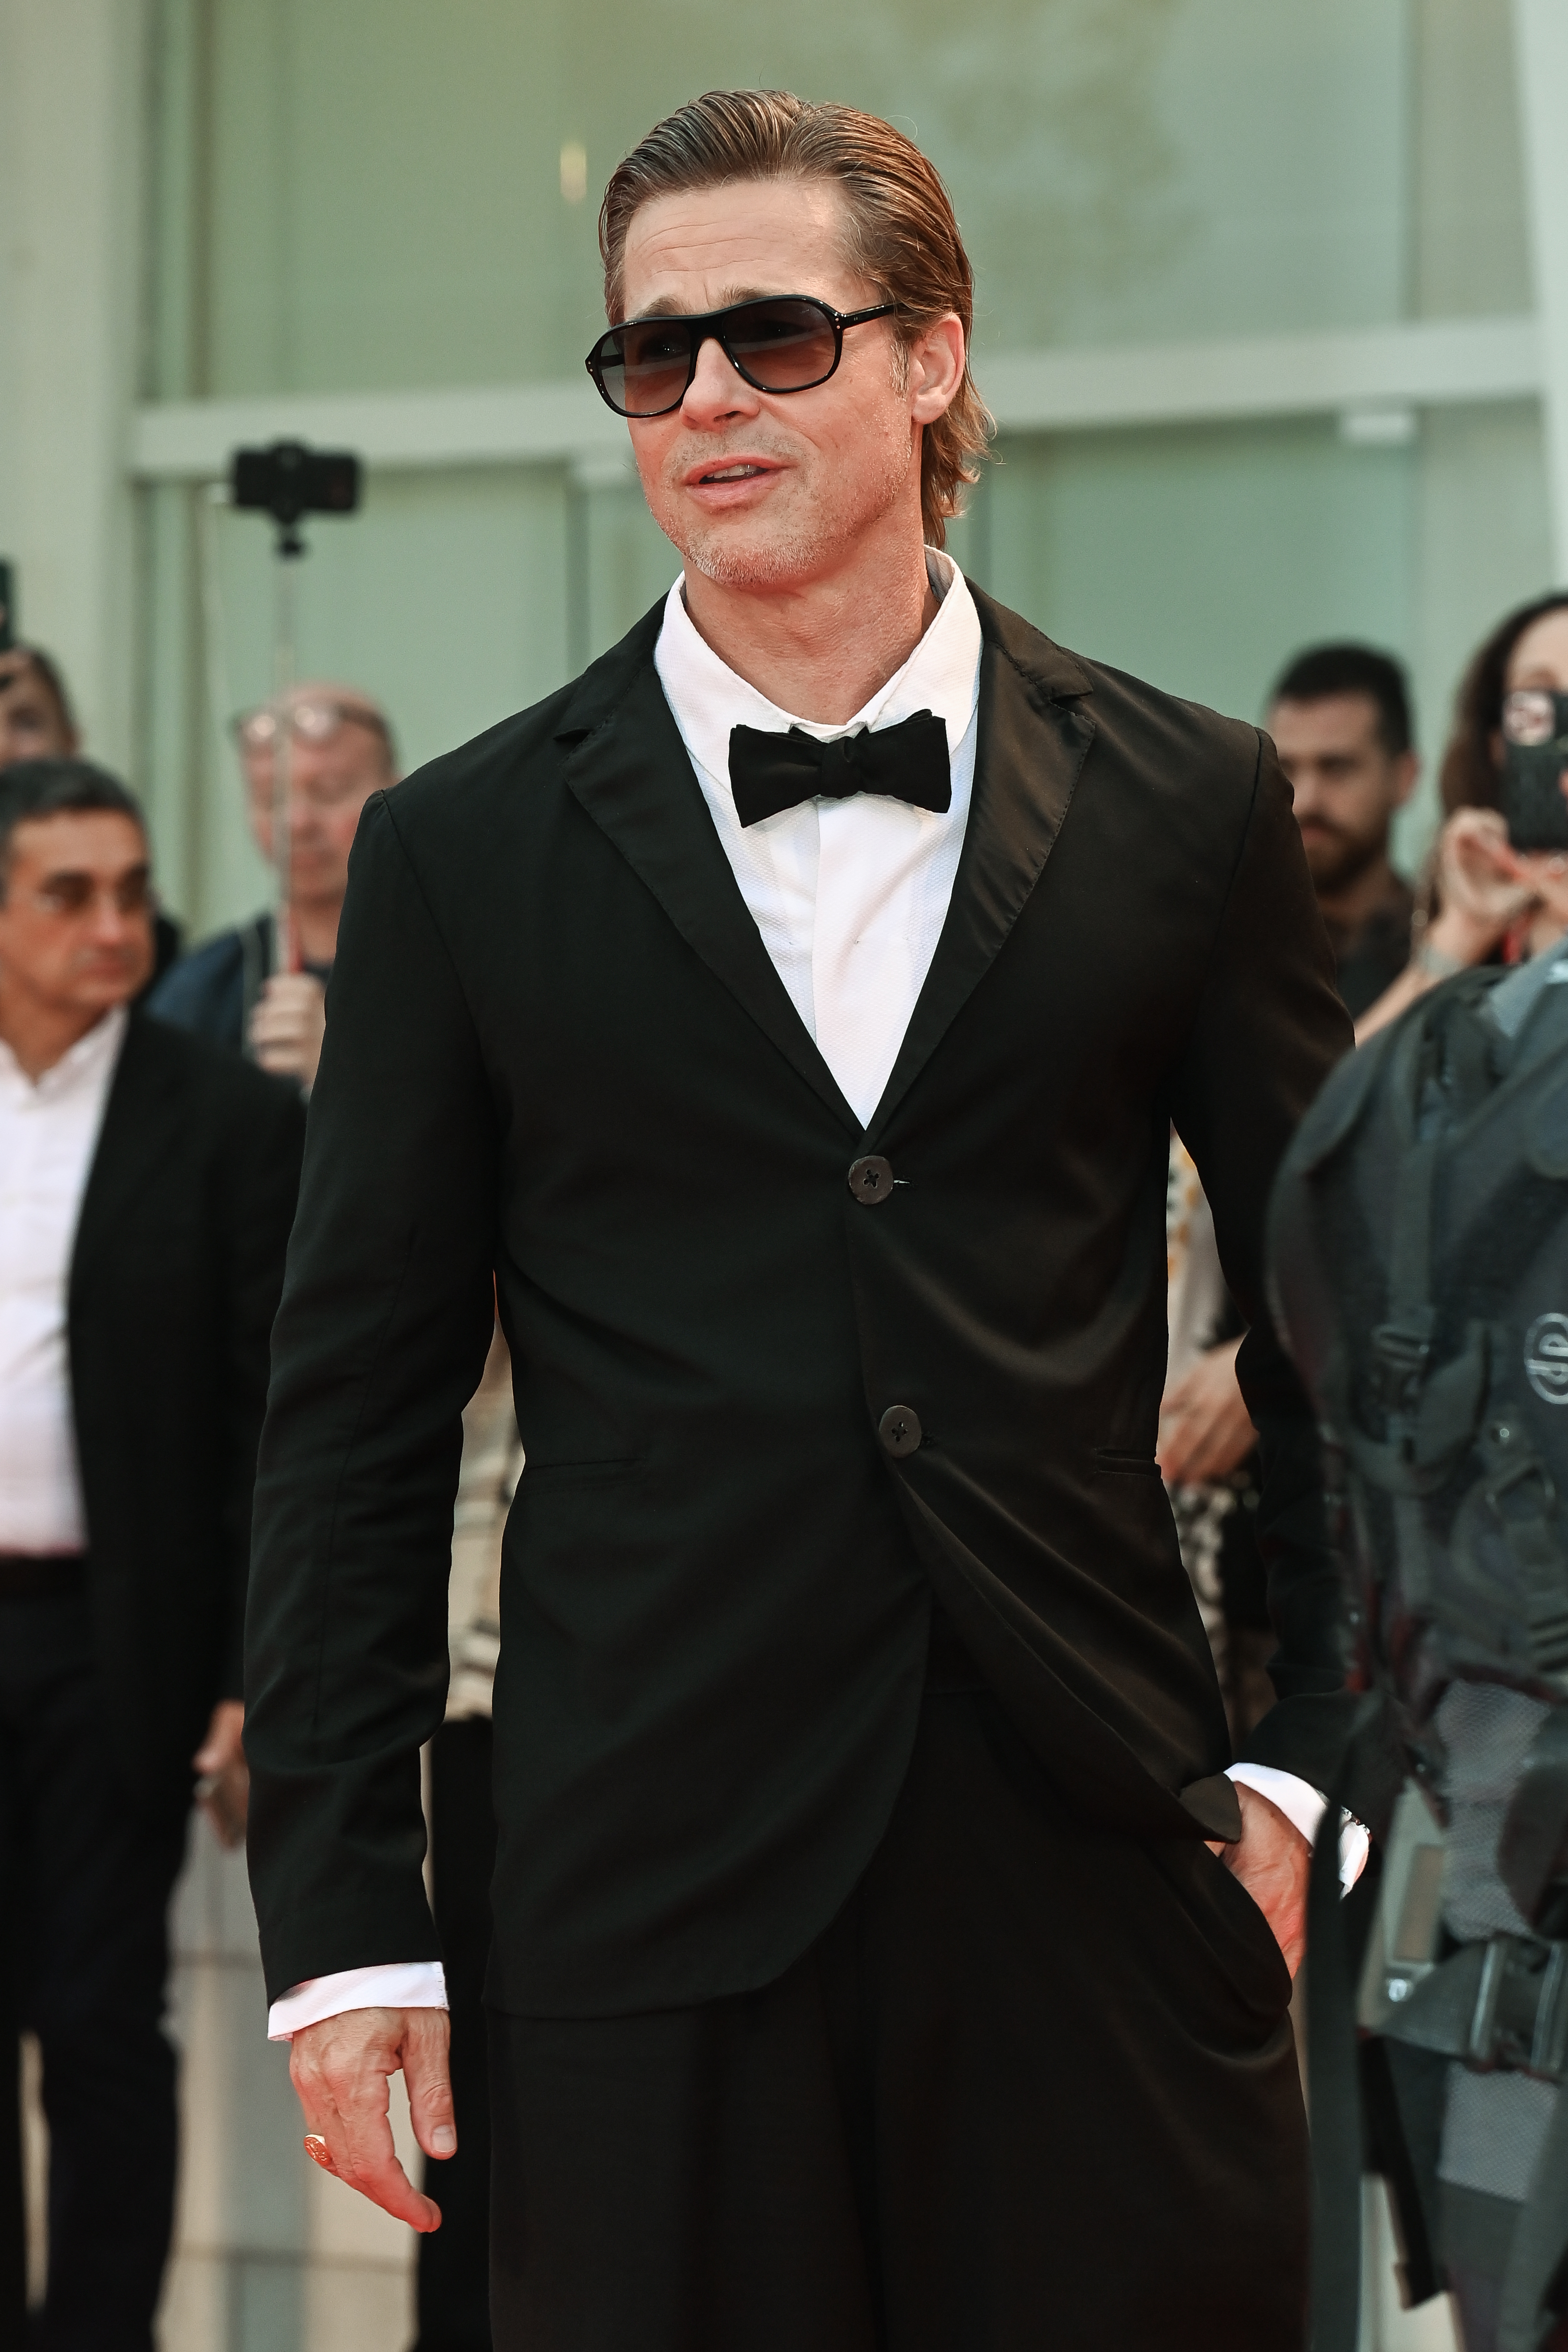 Brad Pitt at the 79th Venice International Film Festival in 2022 | Source: Getty Images